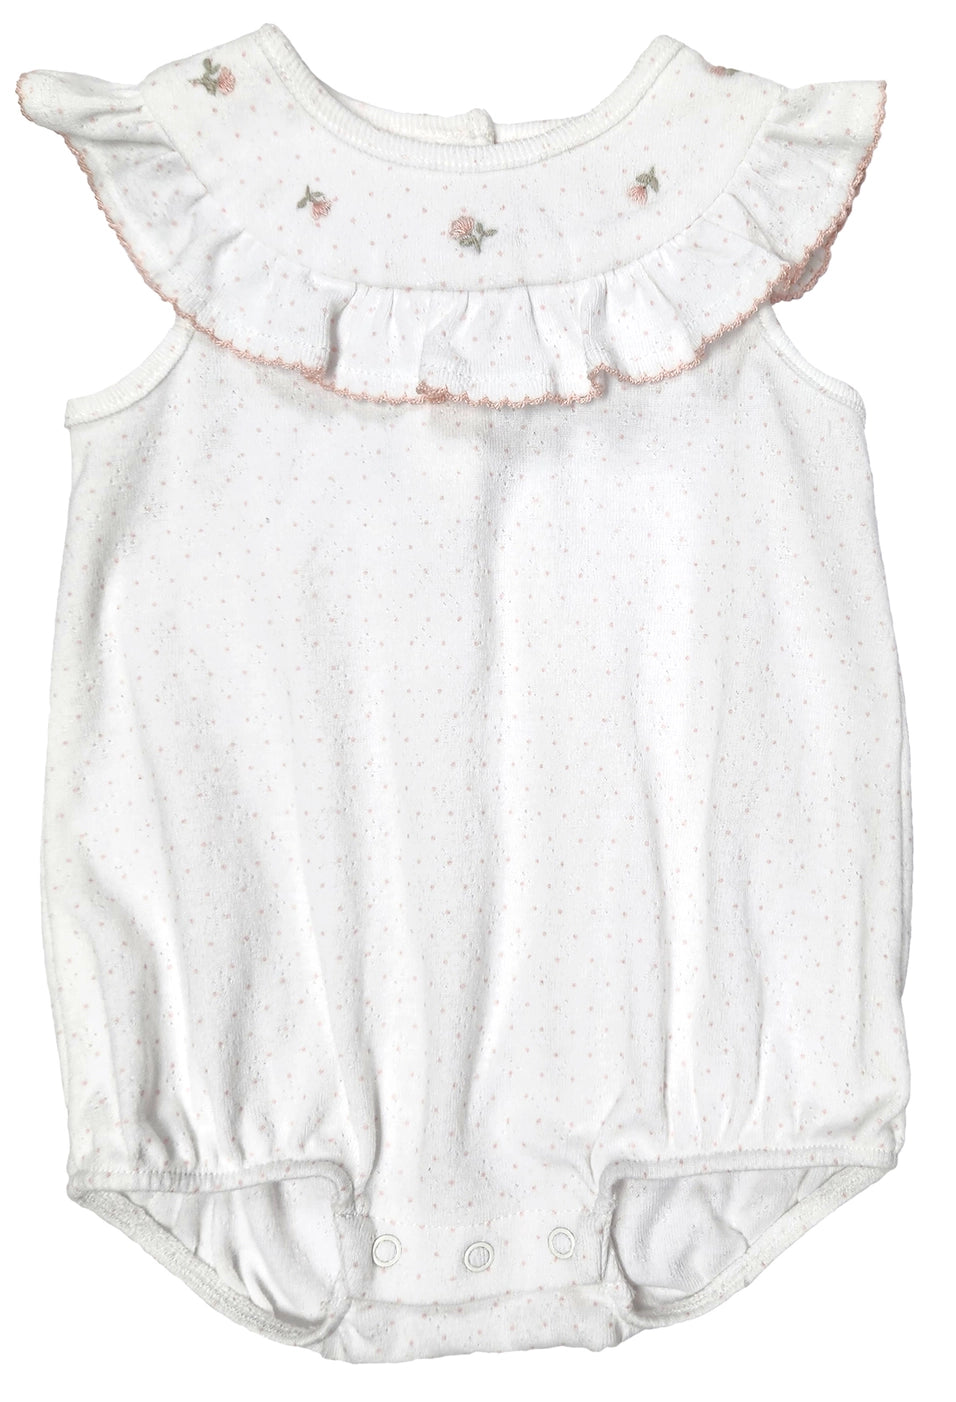 Hand Embroidered Frill Romper - JoeyRae